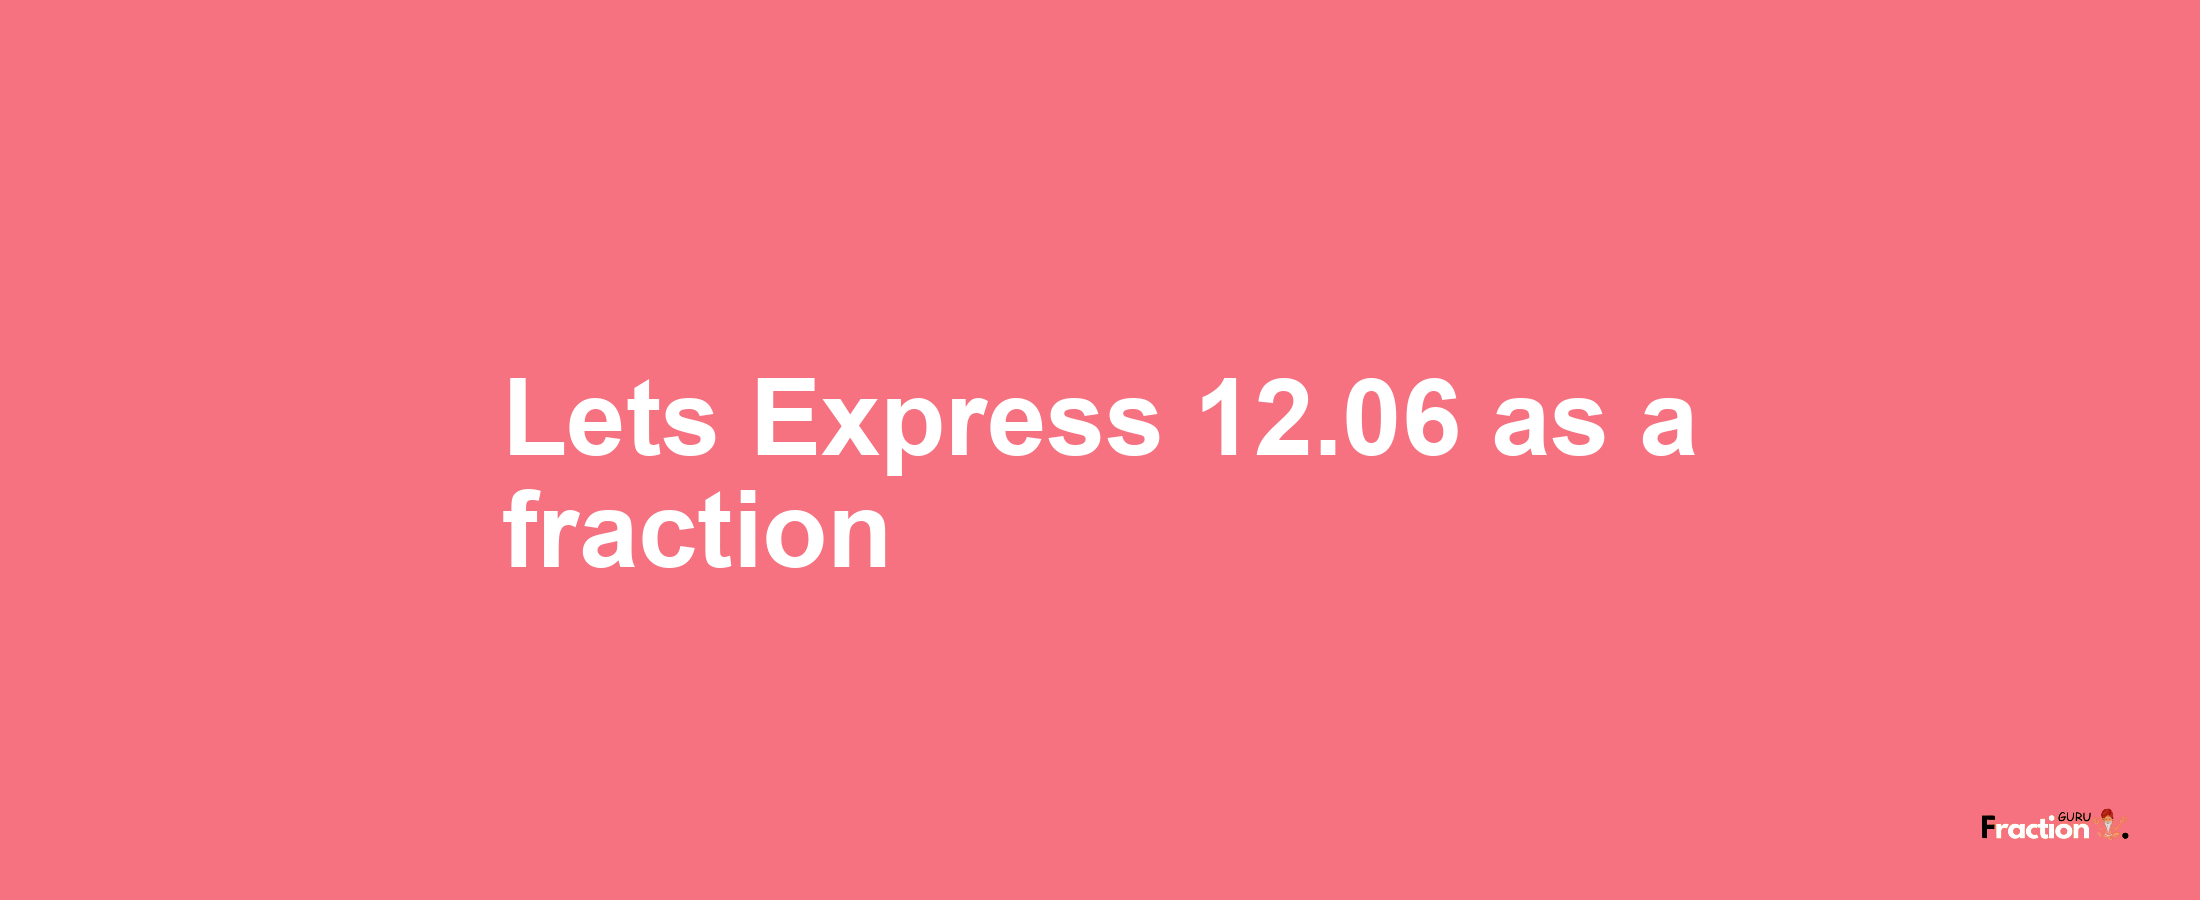 Lets Express 12.06 as afraction